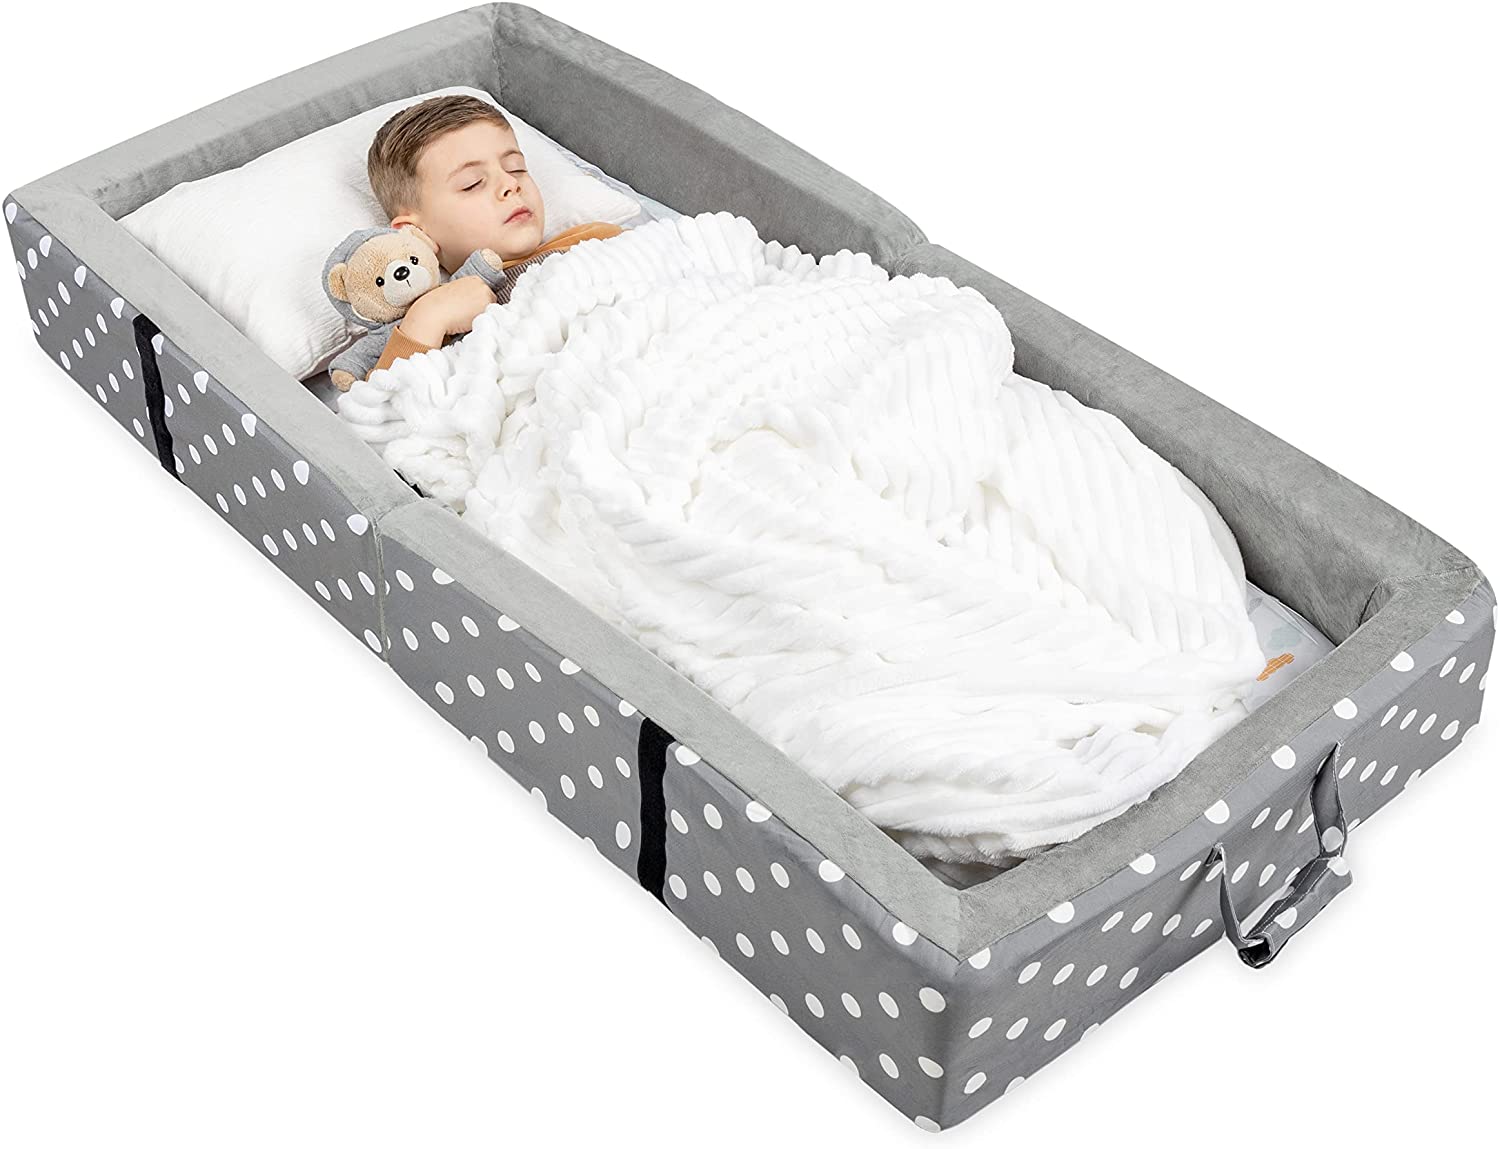 Best Portable Toddler Bed